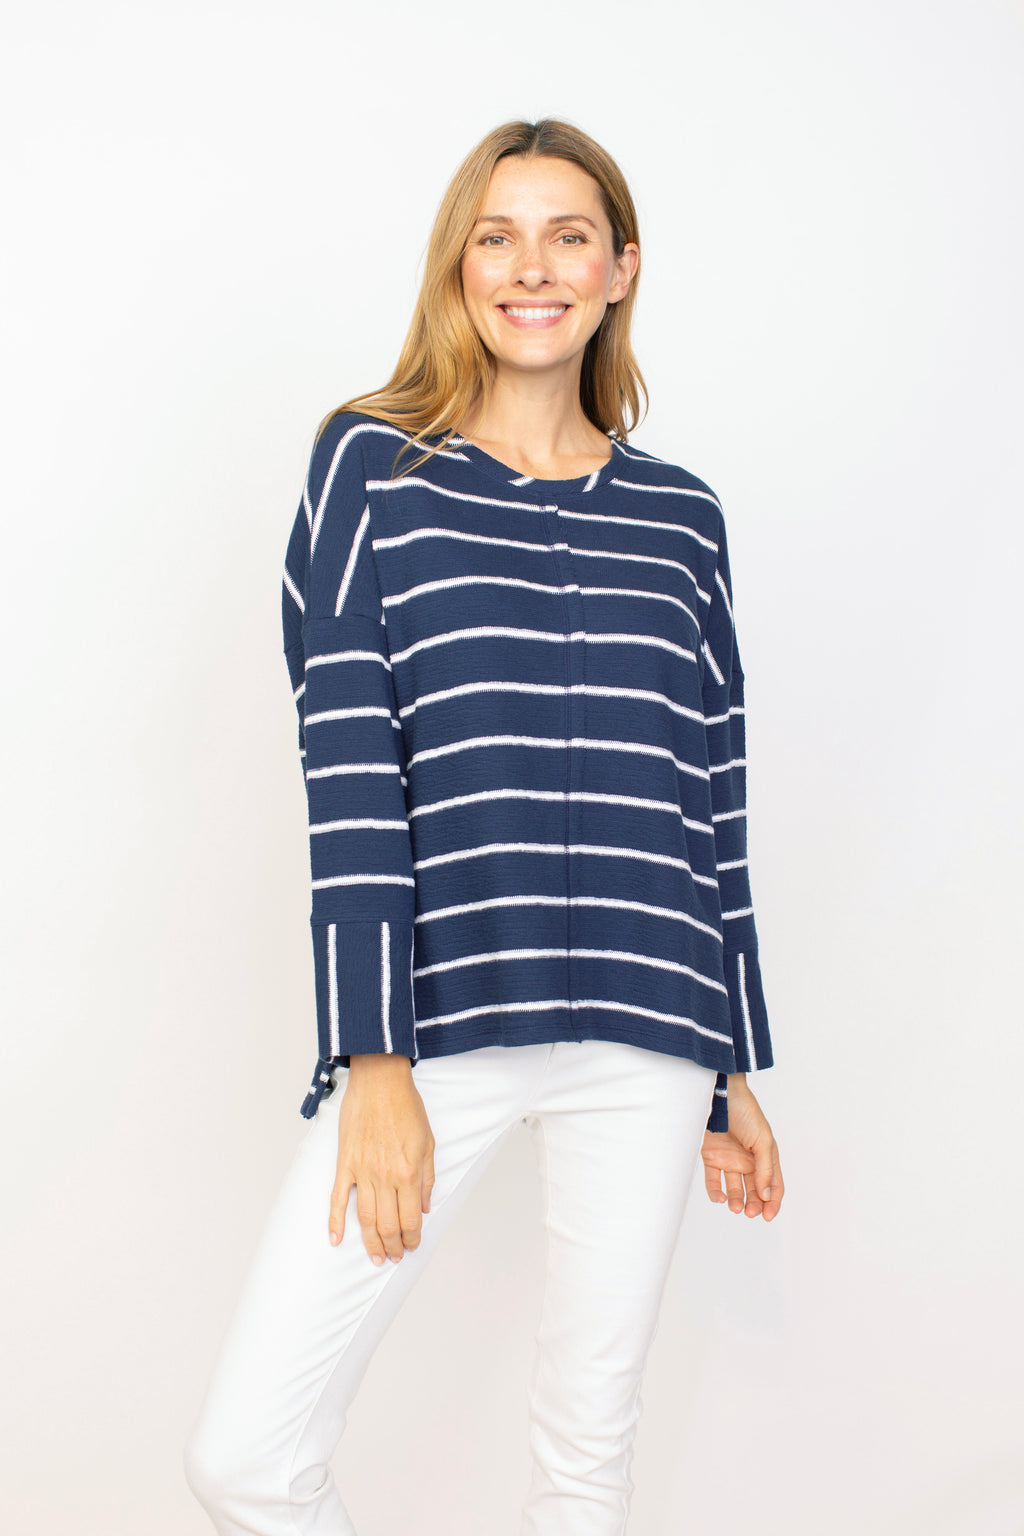 Habitat French Terry Striped Crew Sweater in Navy